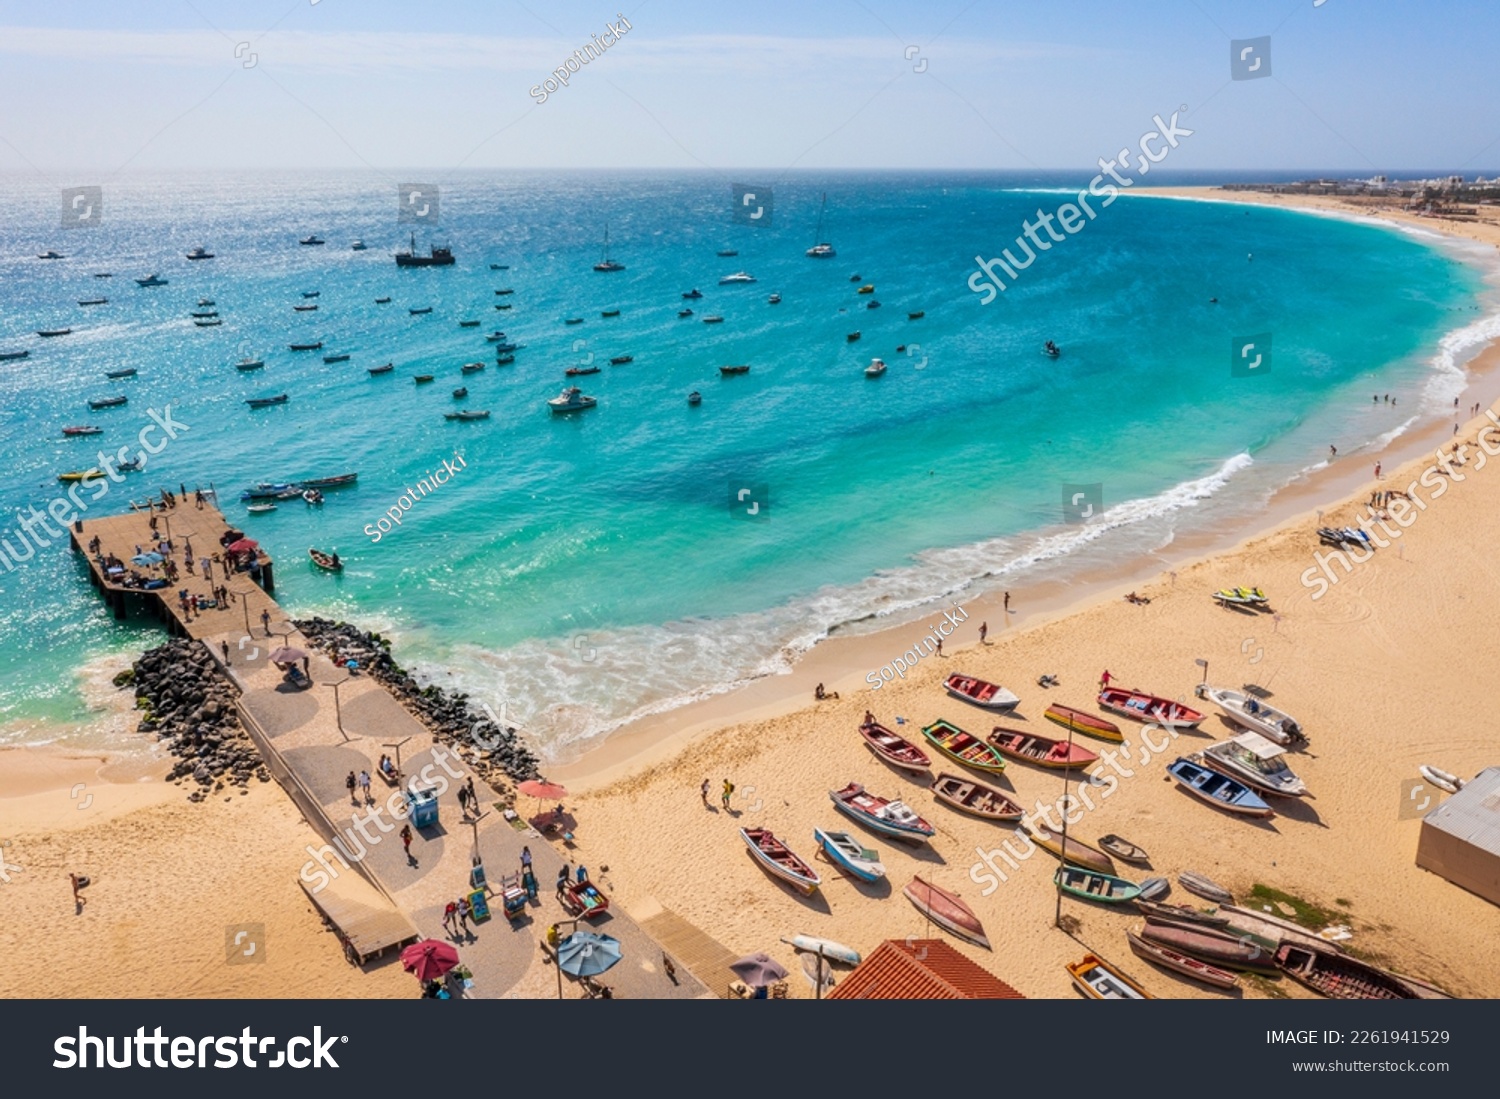 Pier and boats on turquoise water in city of Santa Maria, Sal, Cape Verde #2261941529